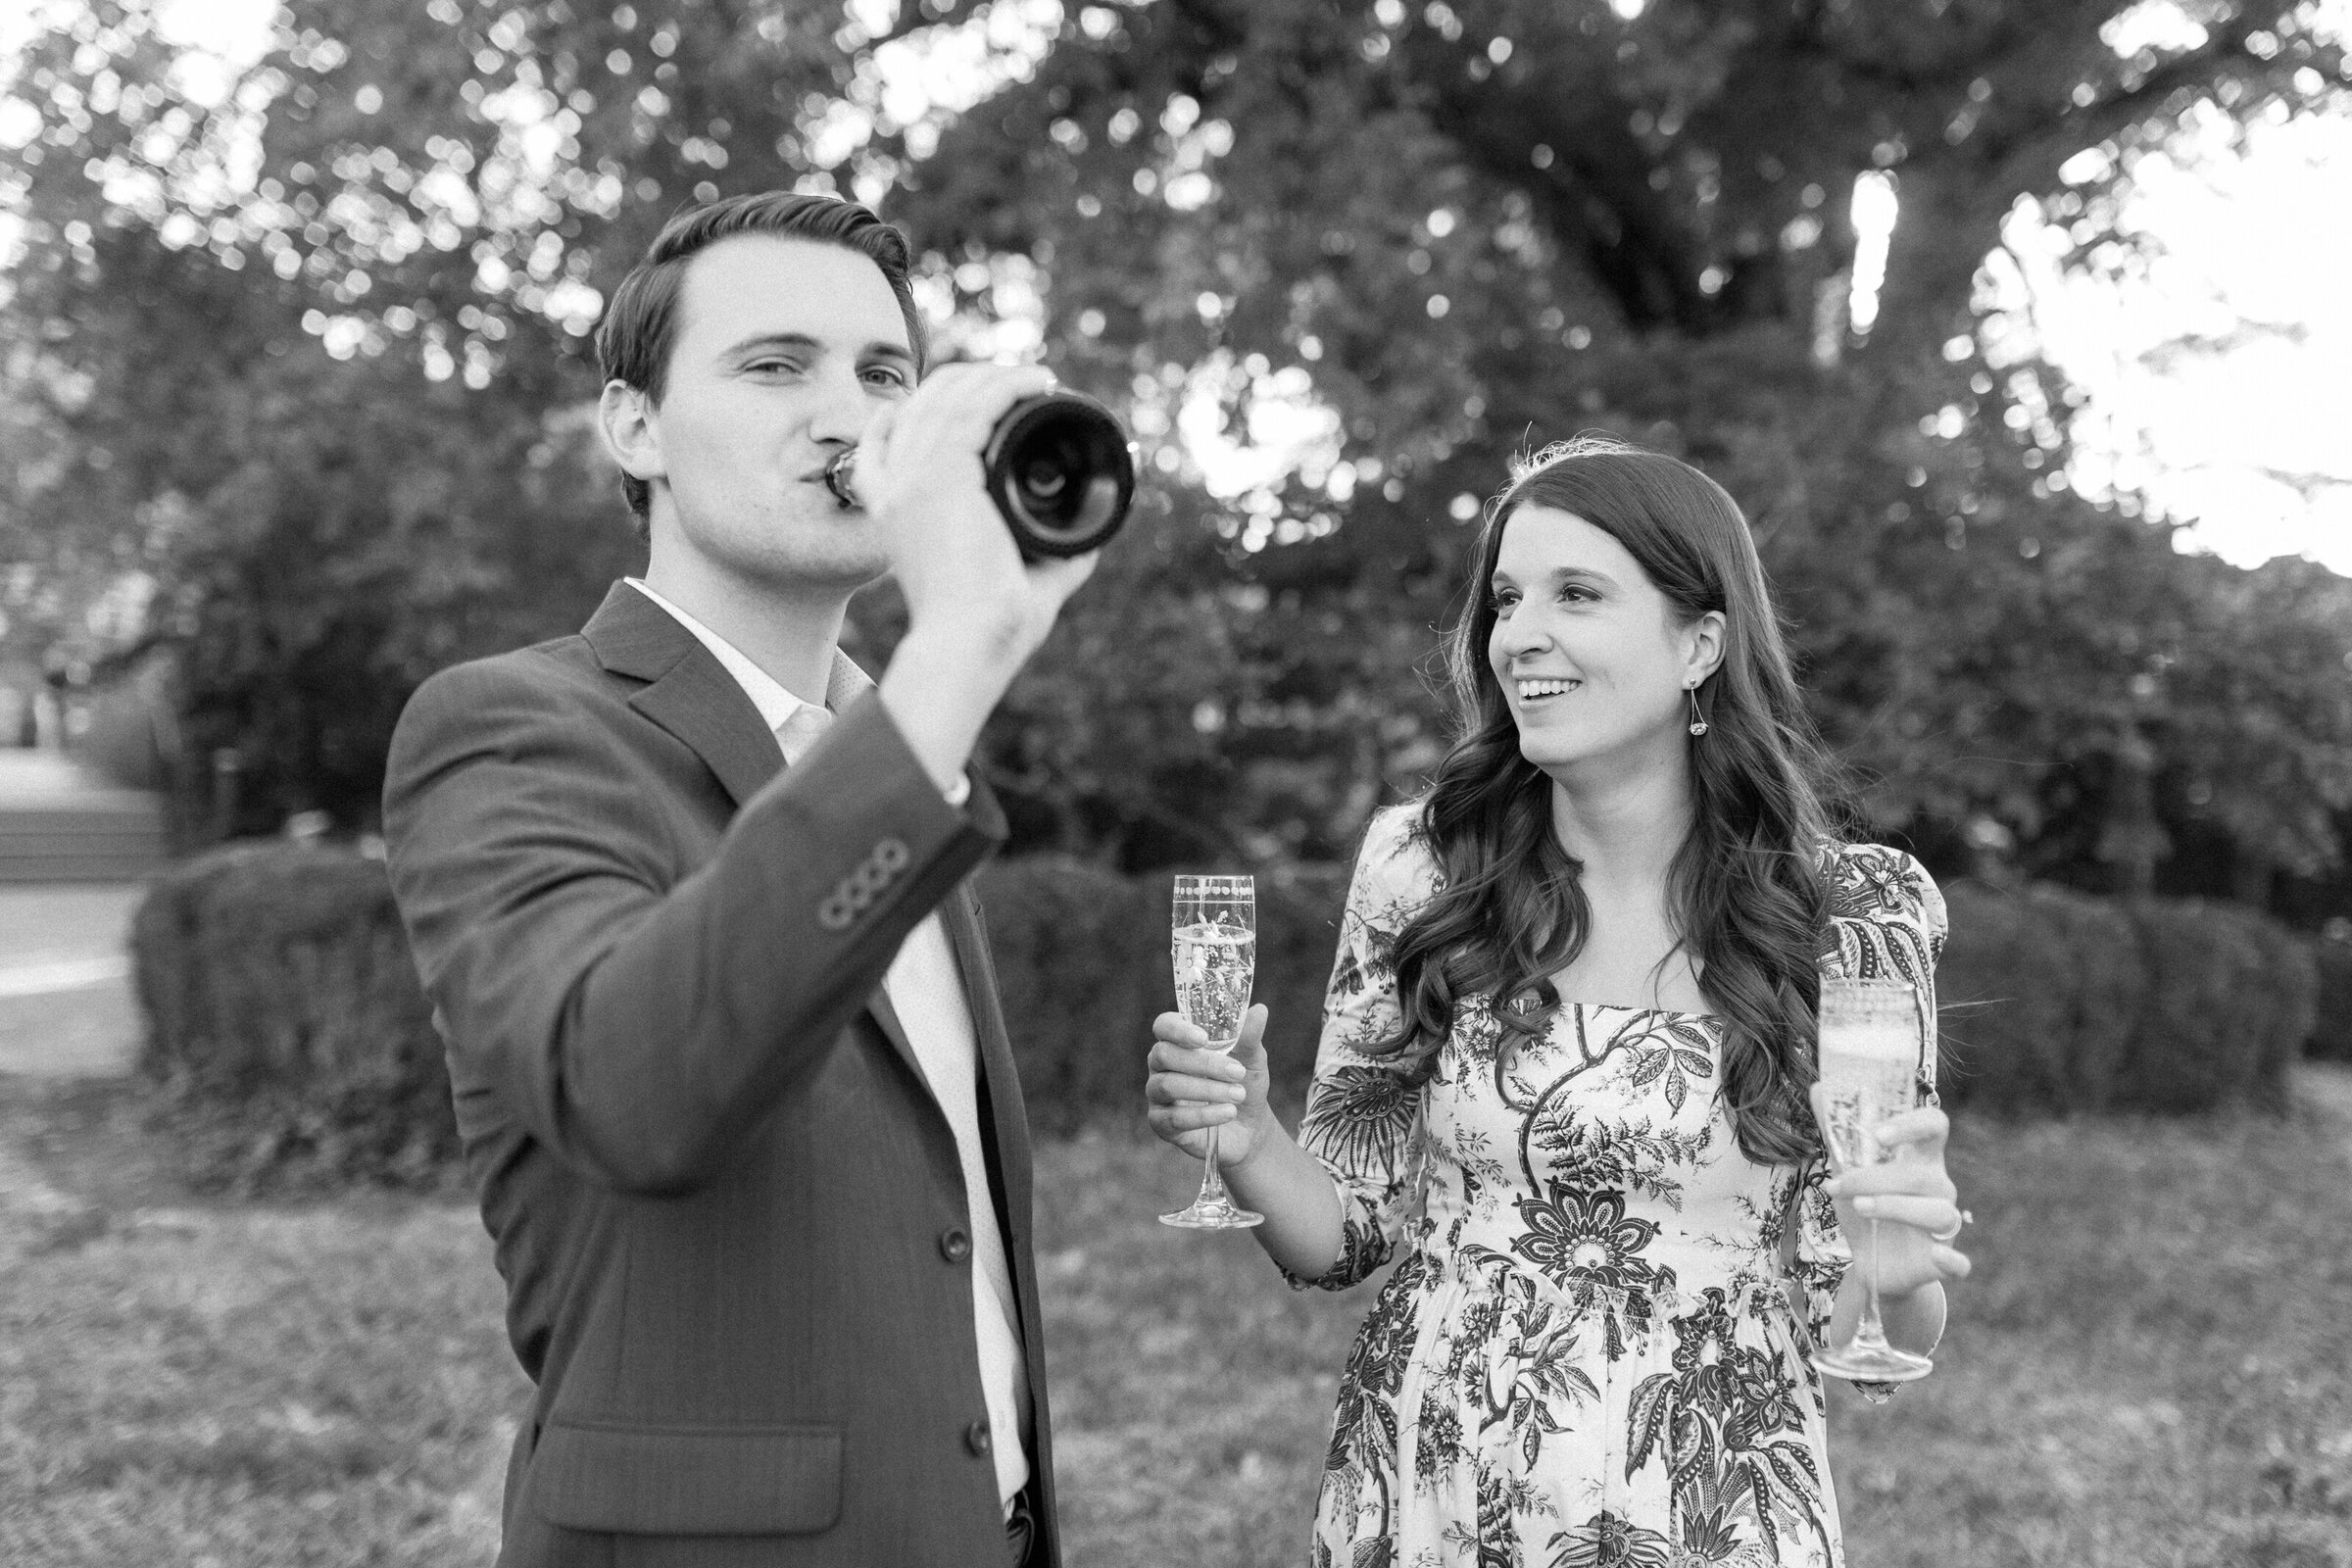 A candid moment of a couple toasting champagne during their engagement session at Ault Park.